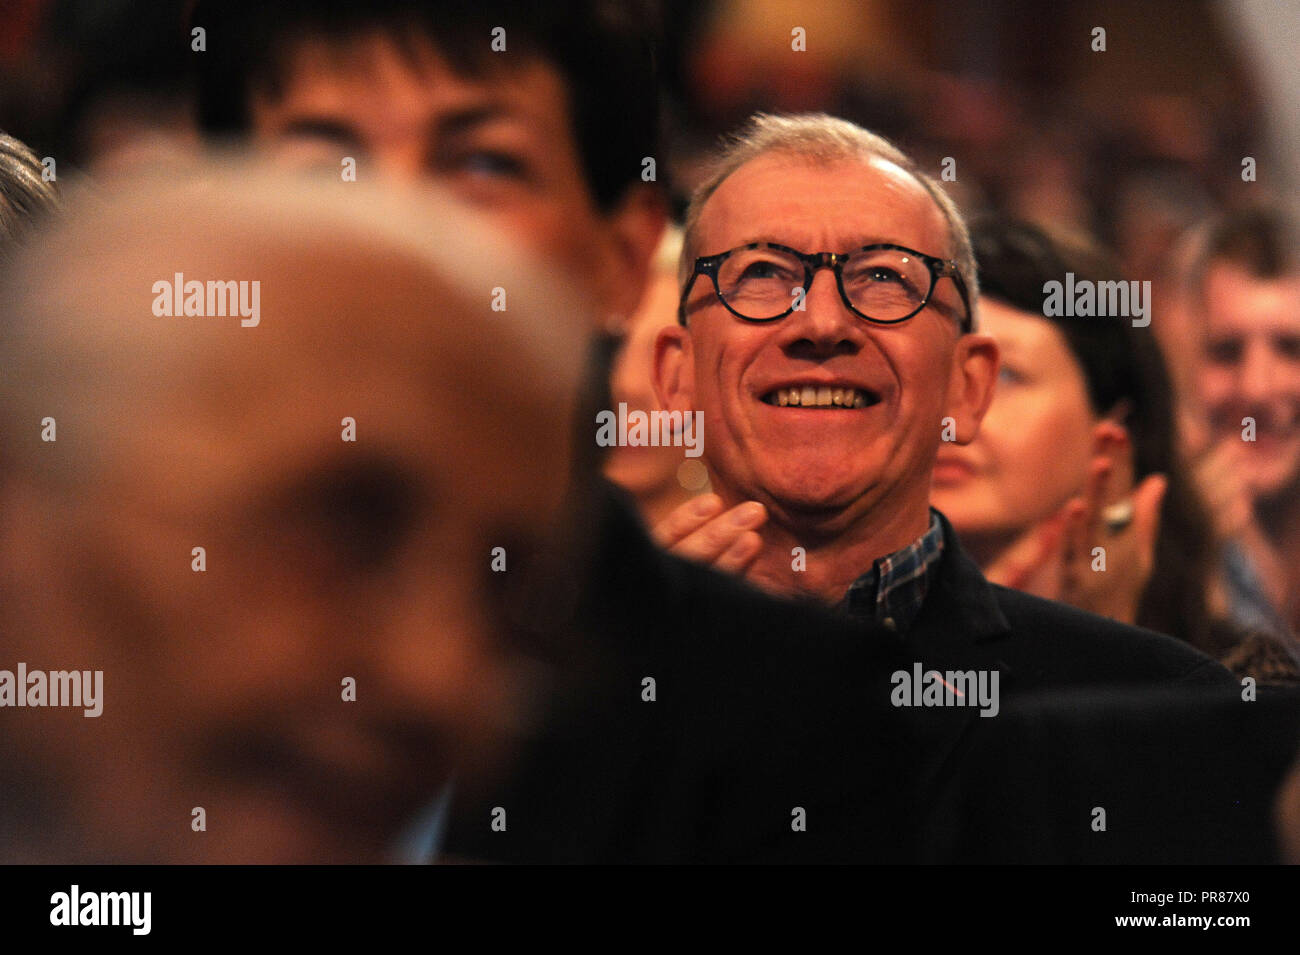 Birmingham, UK. 30th September, 2018.  Philip May, husband of Theresa May MP, Prime Minister and Leader of the Conservative Party, listening to opening speeches to conference on the first session of the first day of the Conservative Party annual conference at the ICC.  Kevin Hayes/Alamy Live News Stock Photo